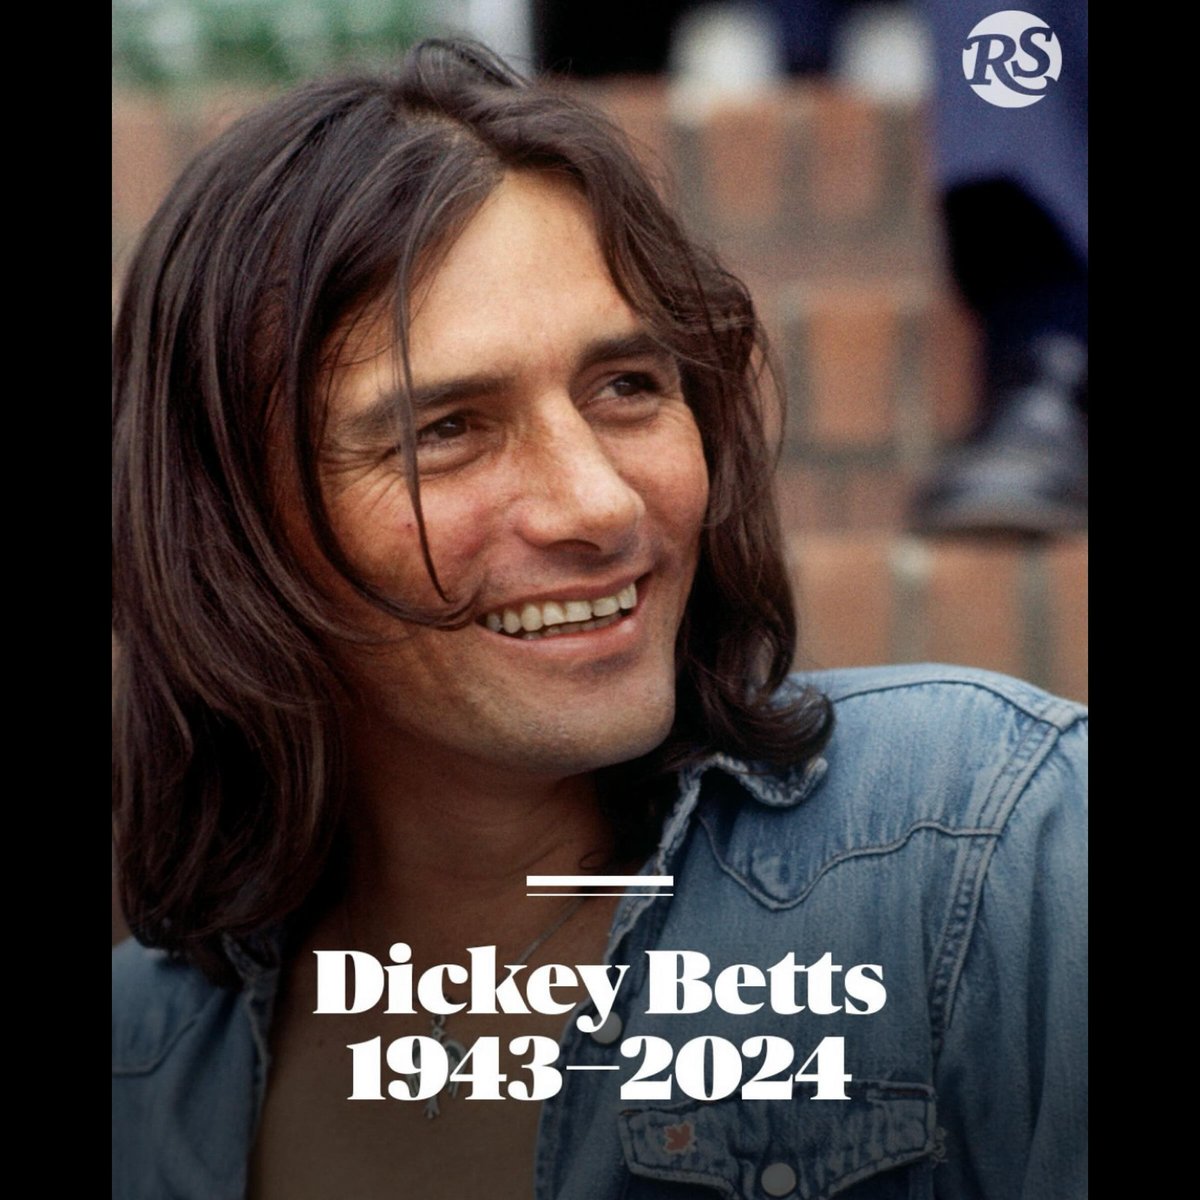 We lost another good one...Rest in Peace Brother Betts...🕊🙏💔 #DickeyBetts #TheAllmanBrothers #RIP